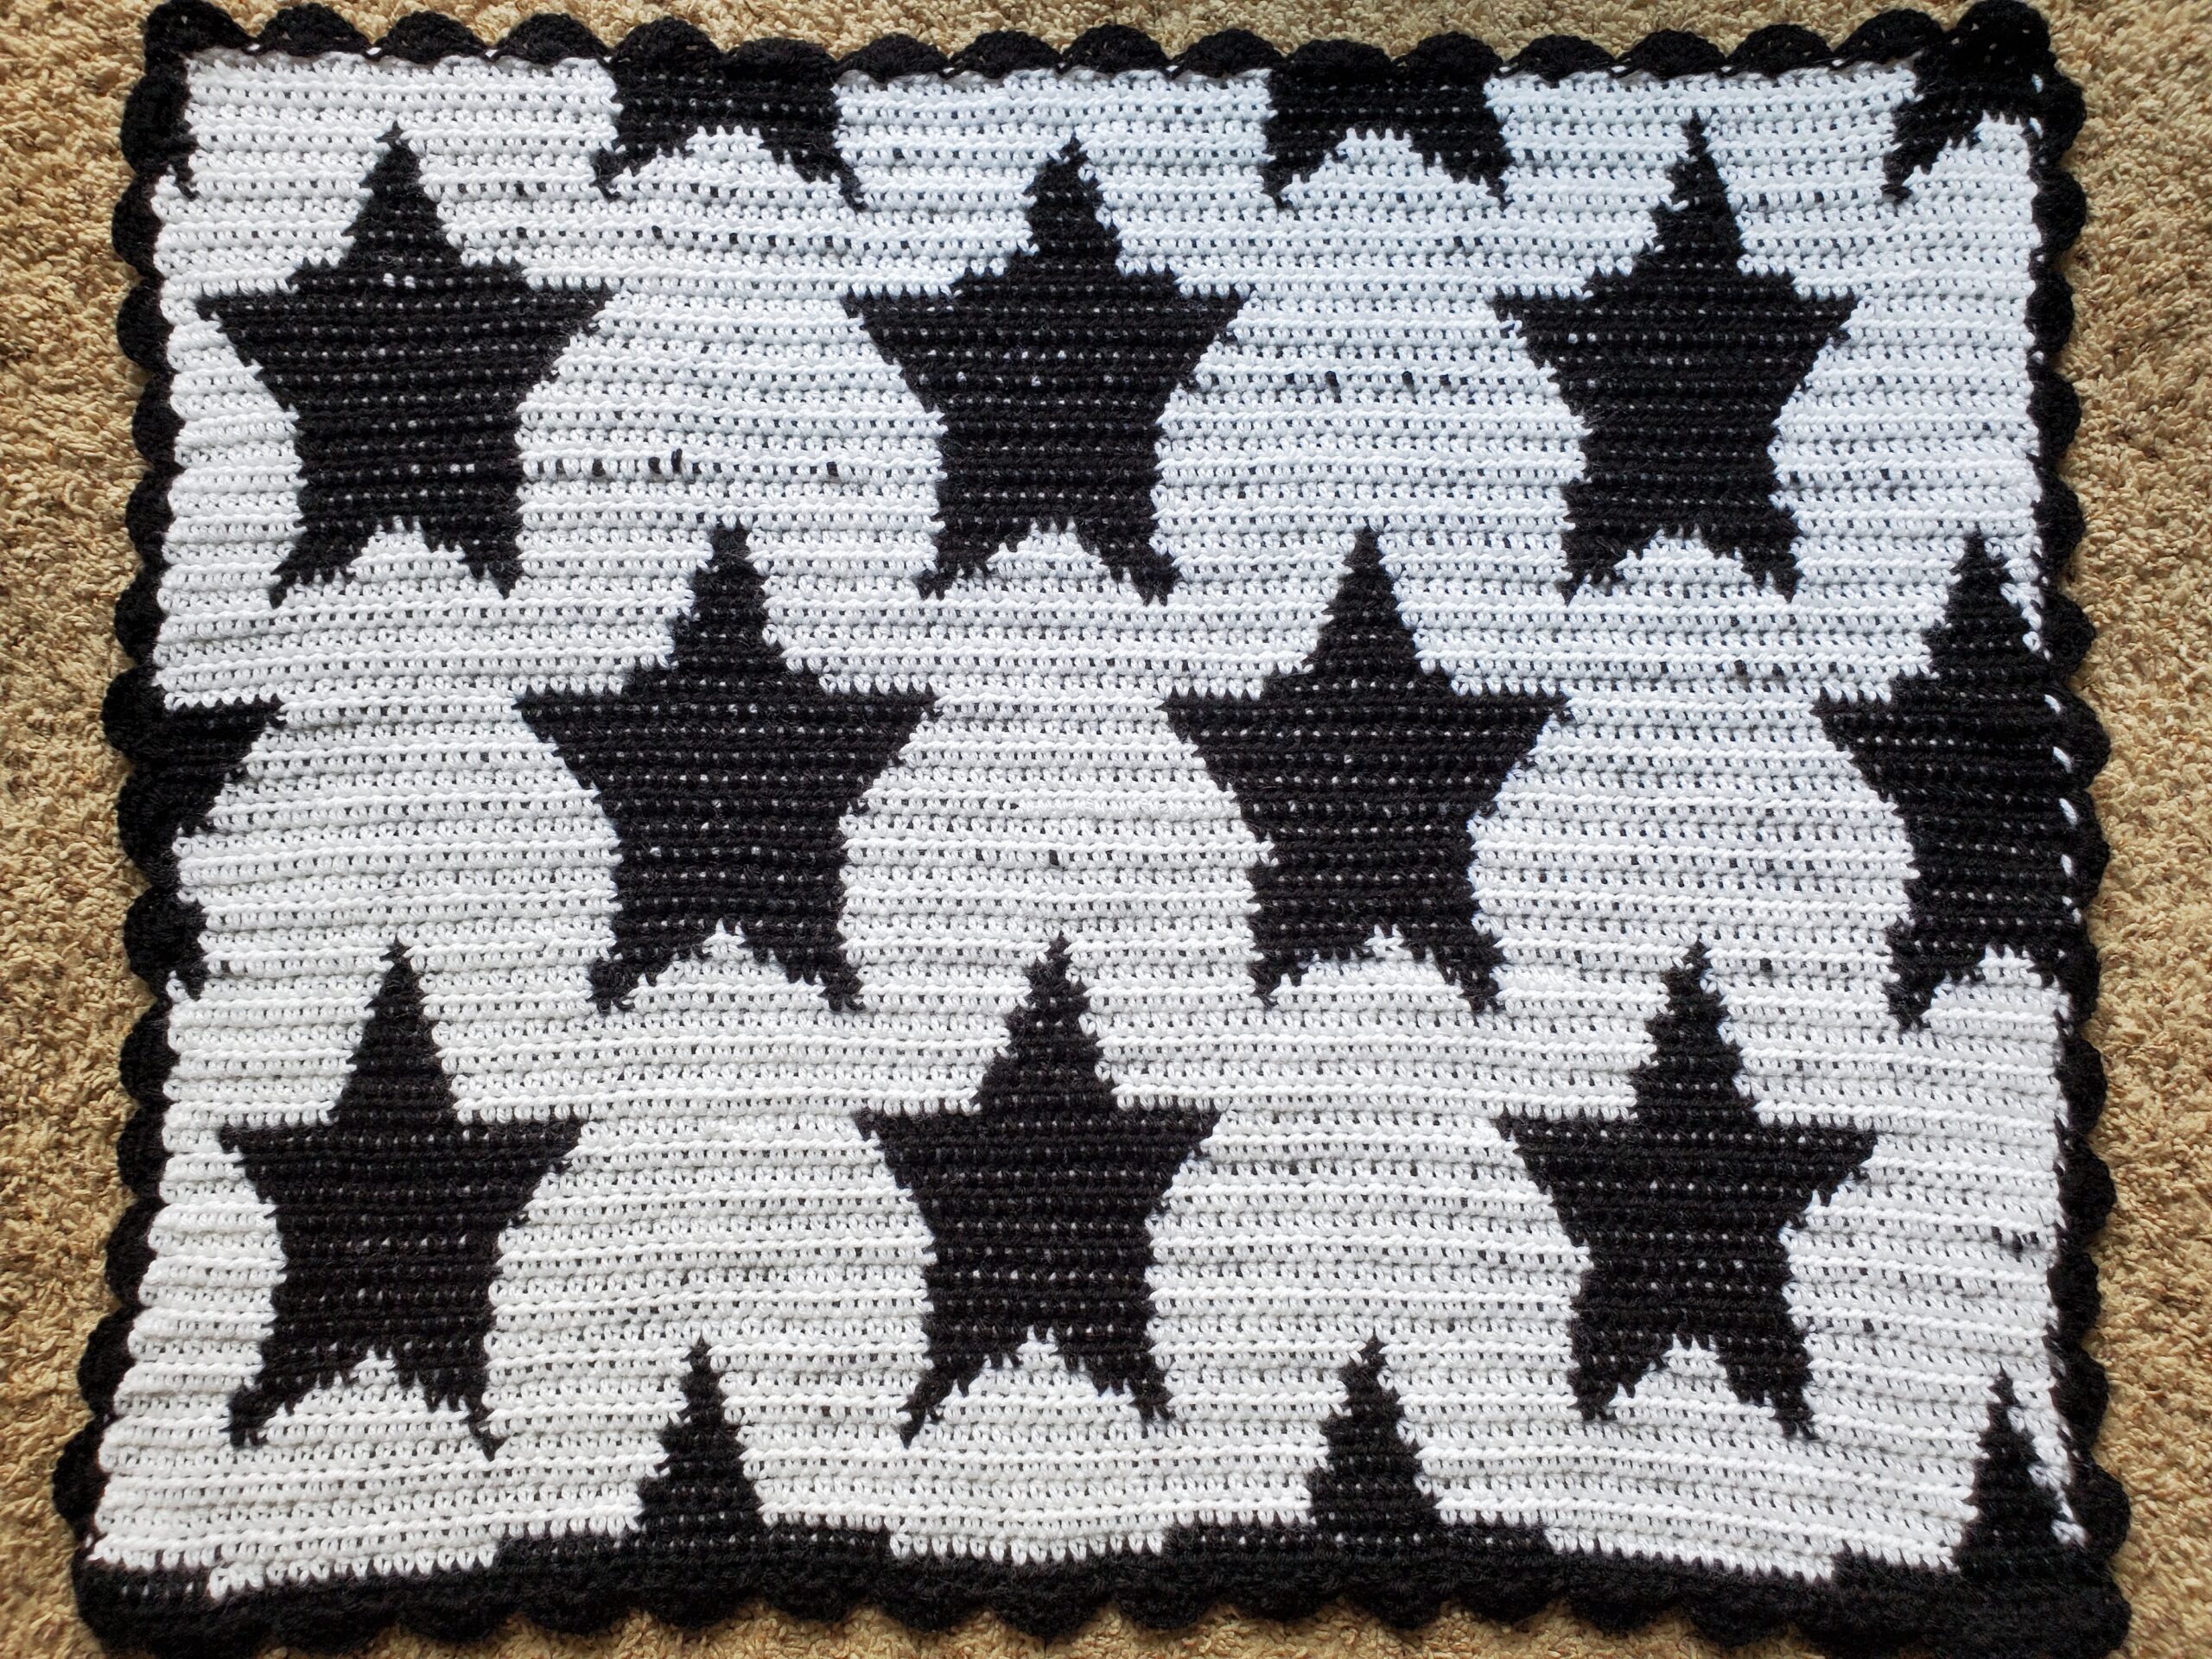  mimixong Baby Blankets Knitted Toddler Blankets Black and White  with Cross Swiss Pattern for Boy and Girl 30×40 Inch Black : Baby